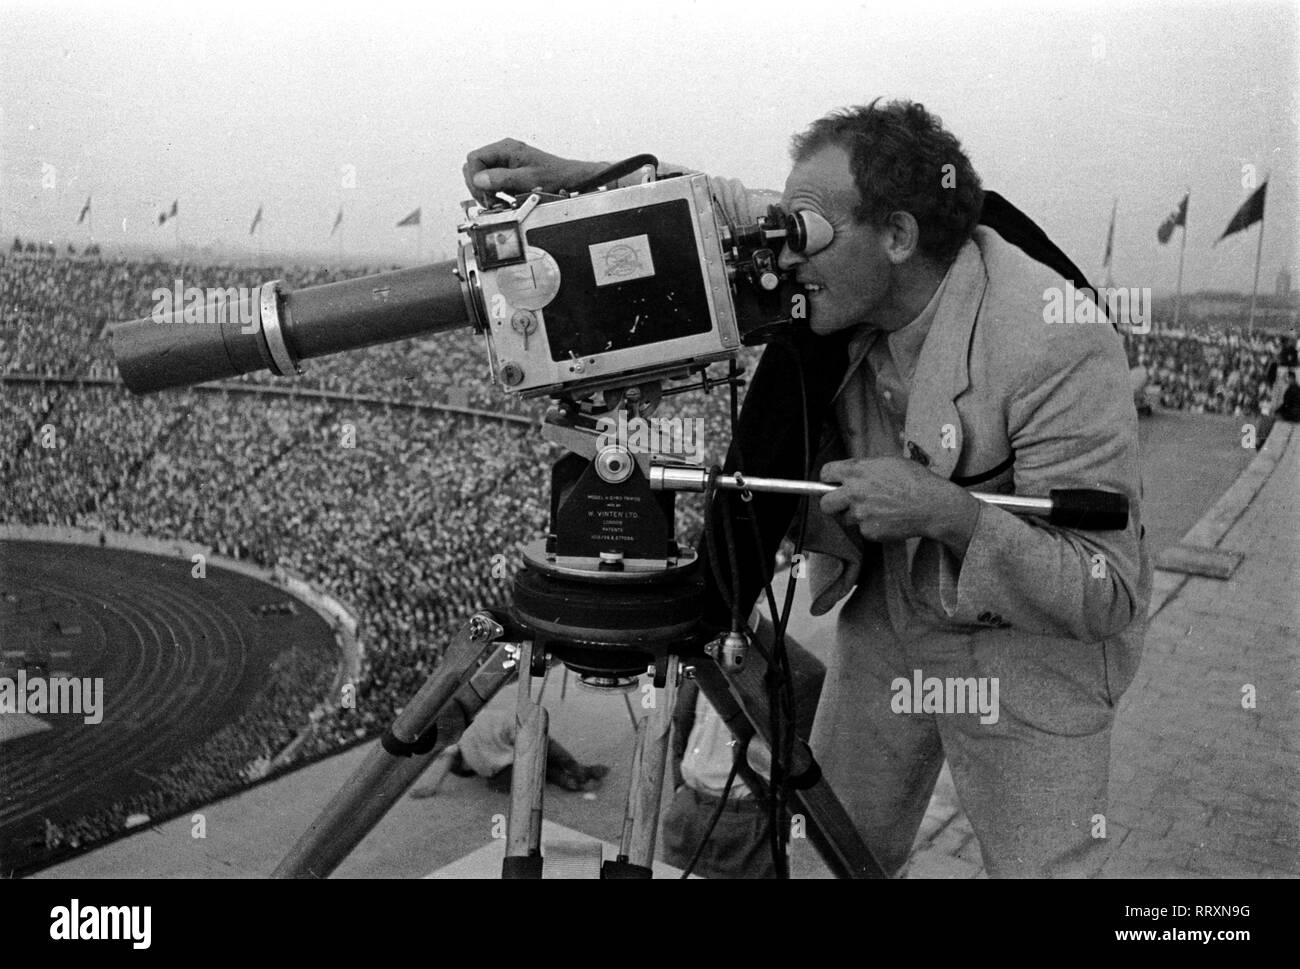 Summer Olympics 1936 - Germany, Third Reich - Olympic Games, Summer Olympics 1936 in Berlin. Cameraman at the Olympic arena. Image date August 1936. Photo Erich Andres Stock Photo